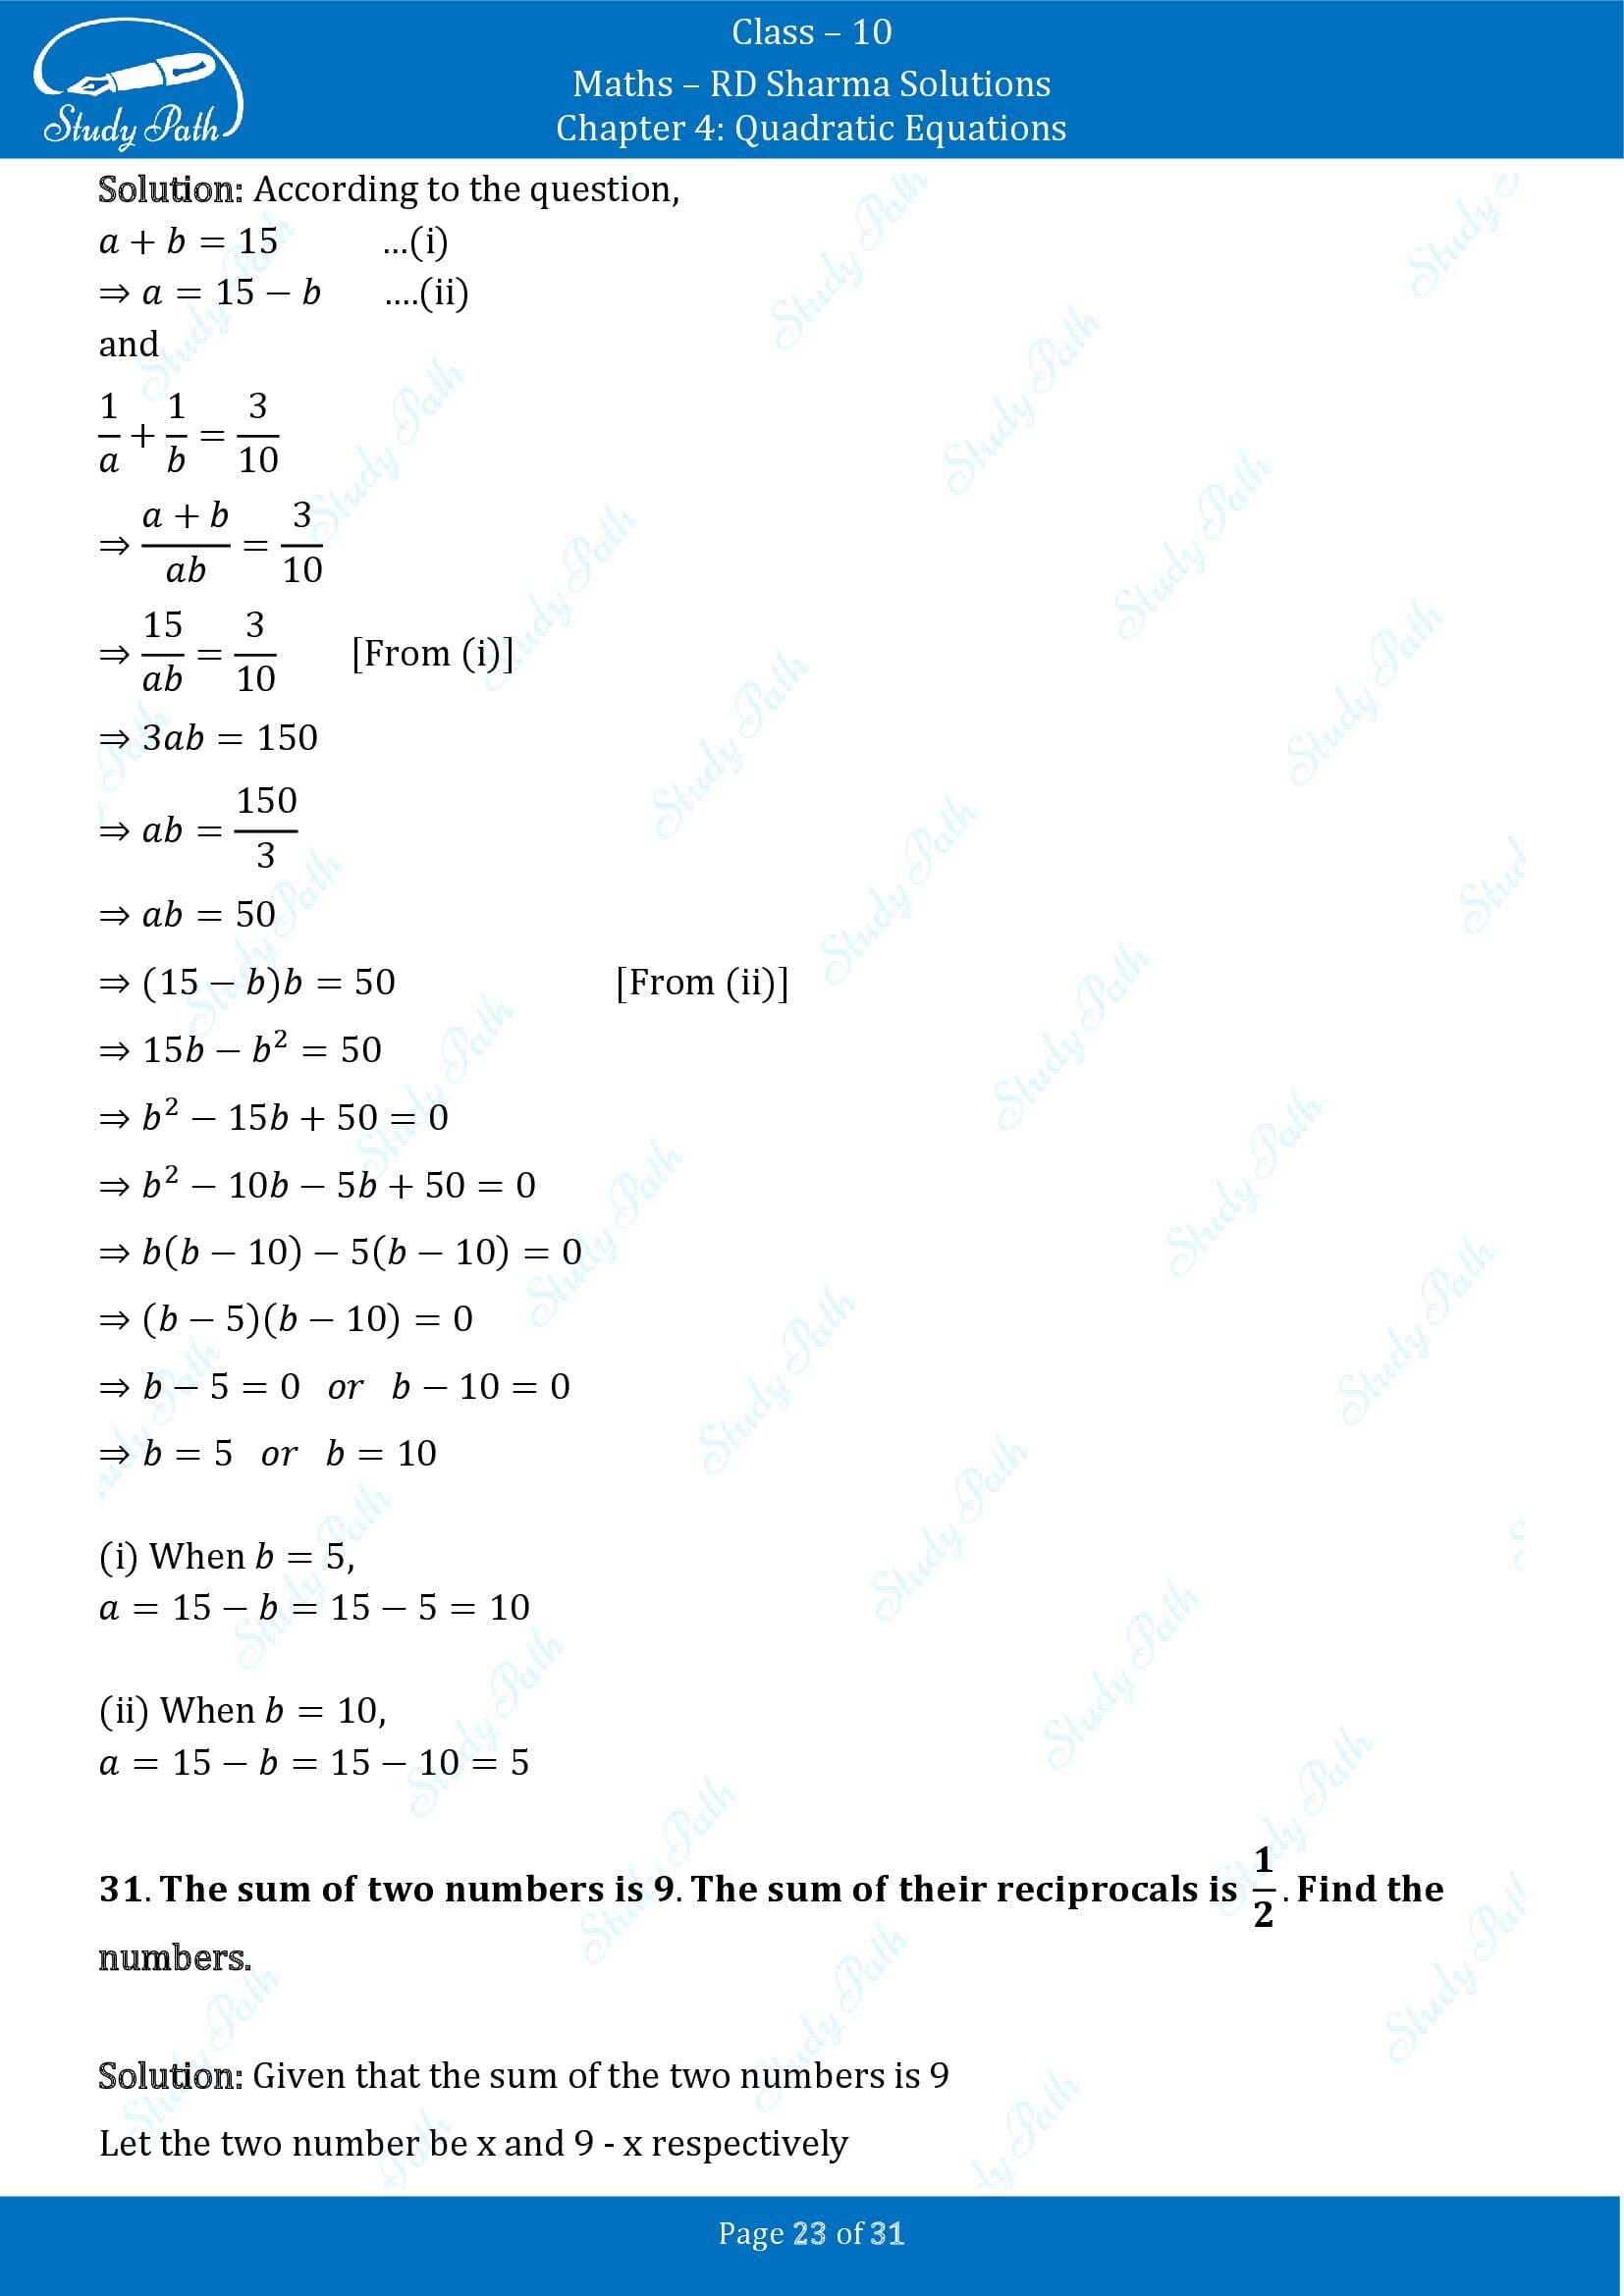 RD Sharma Solutions Class 10 Chapter 4 Quadratic Equations Exercise 4.7 00023